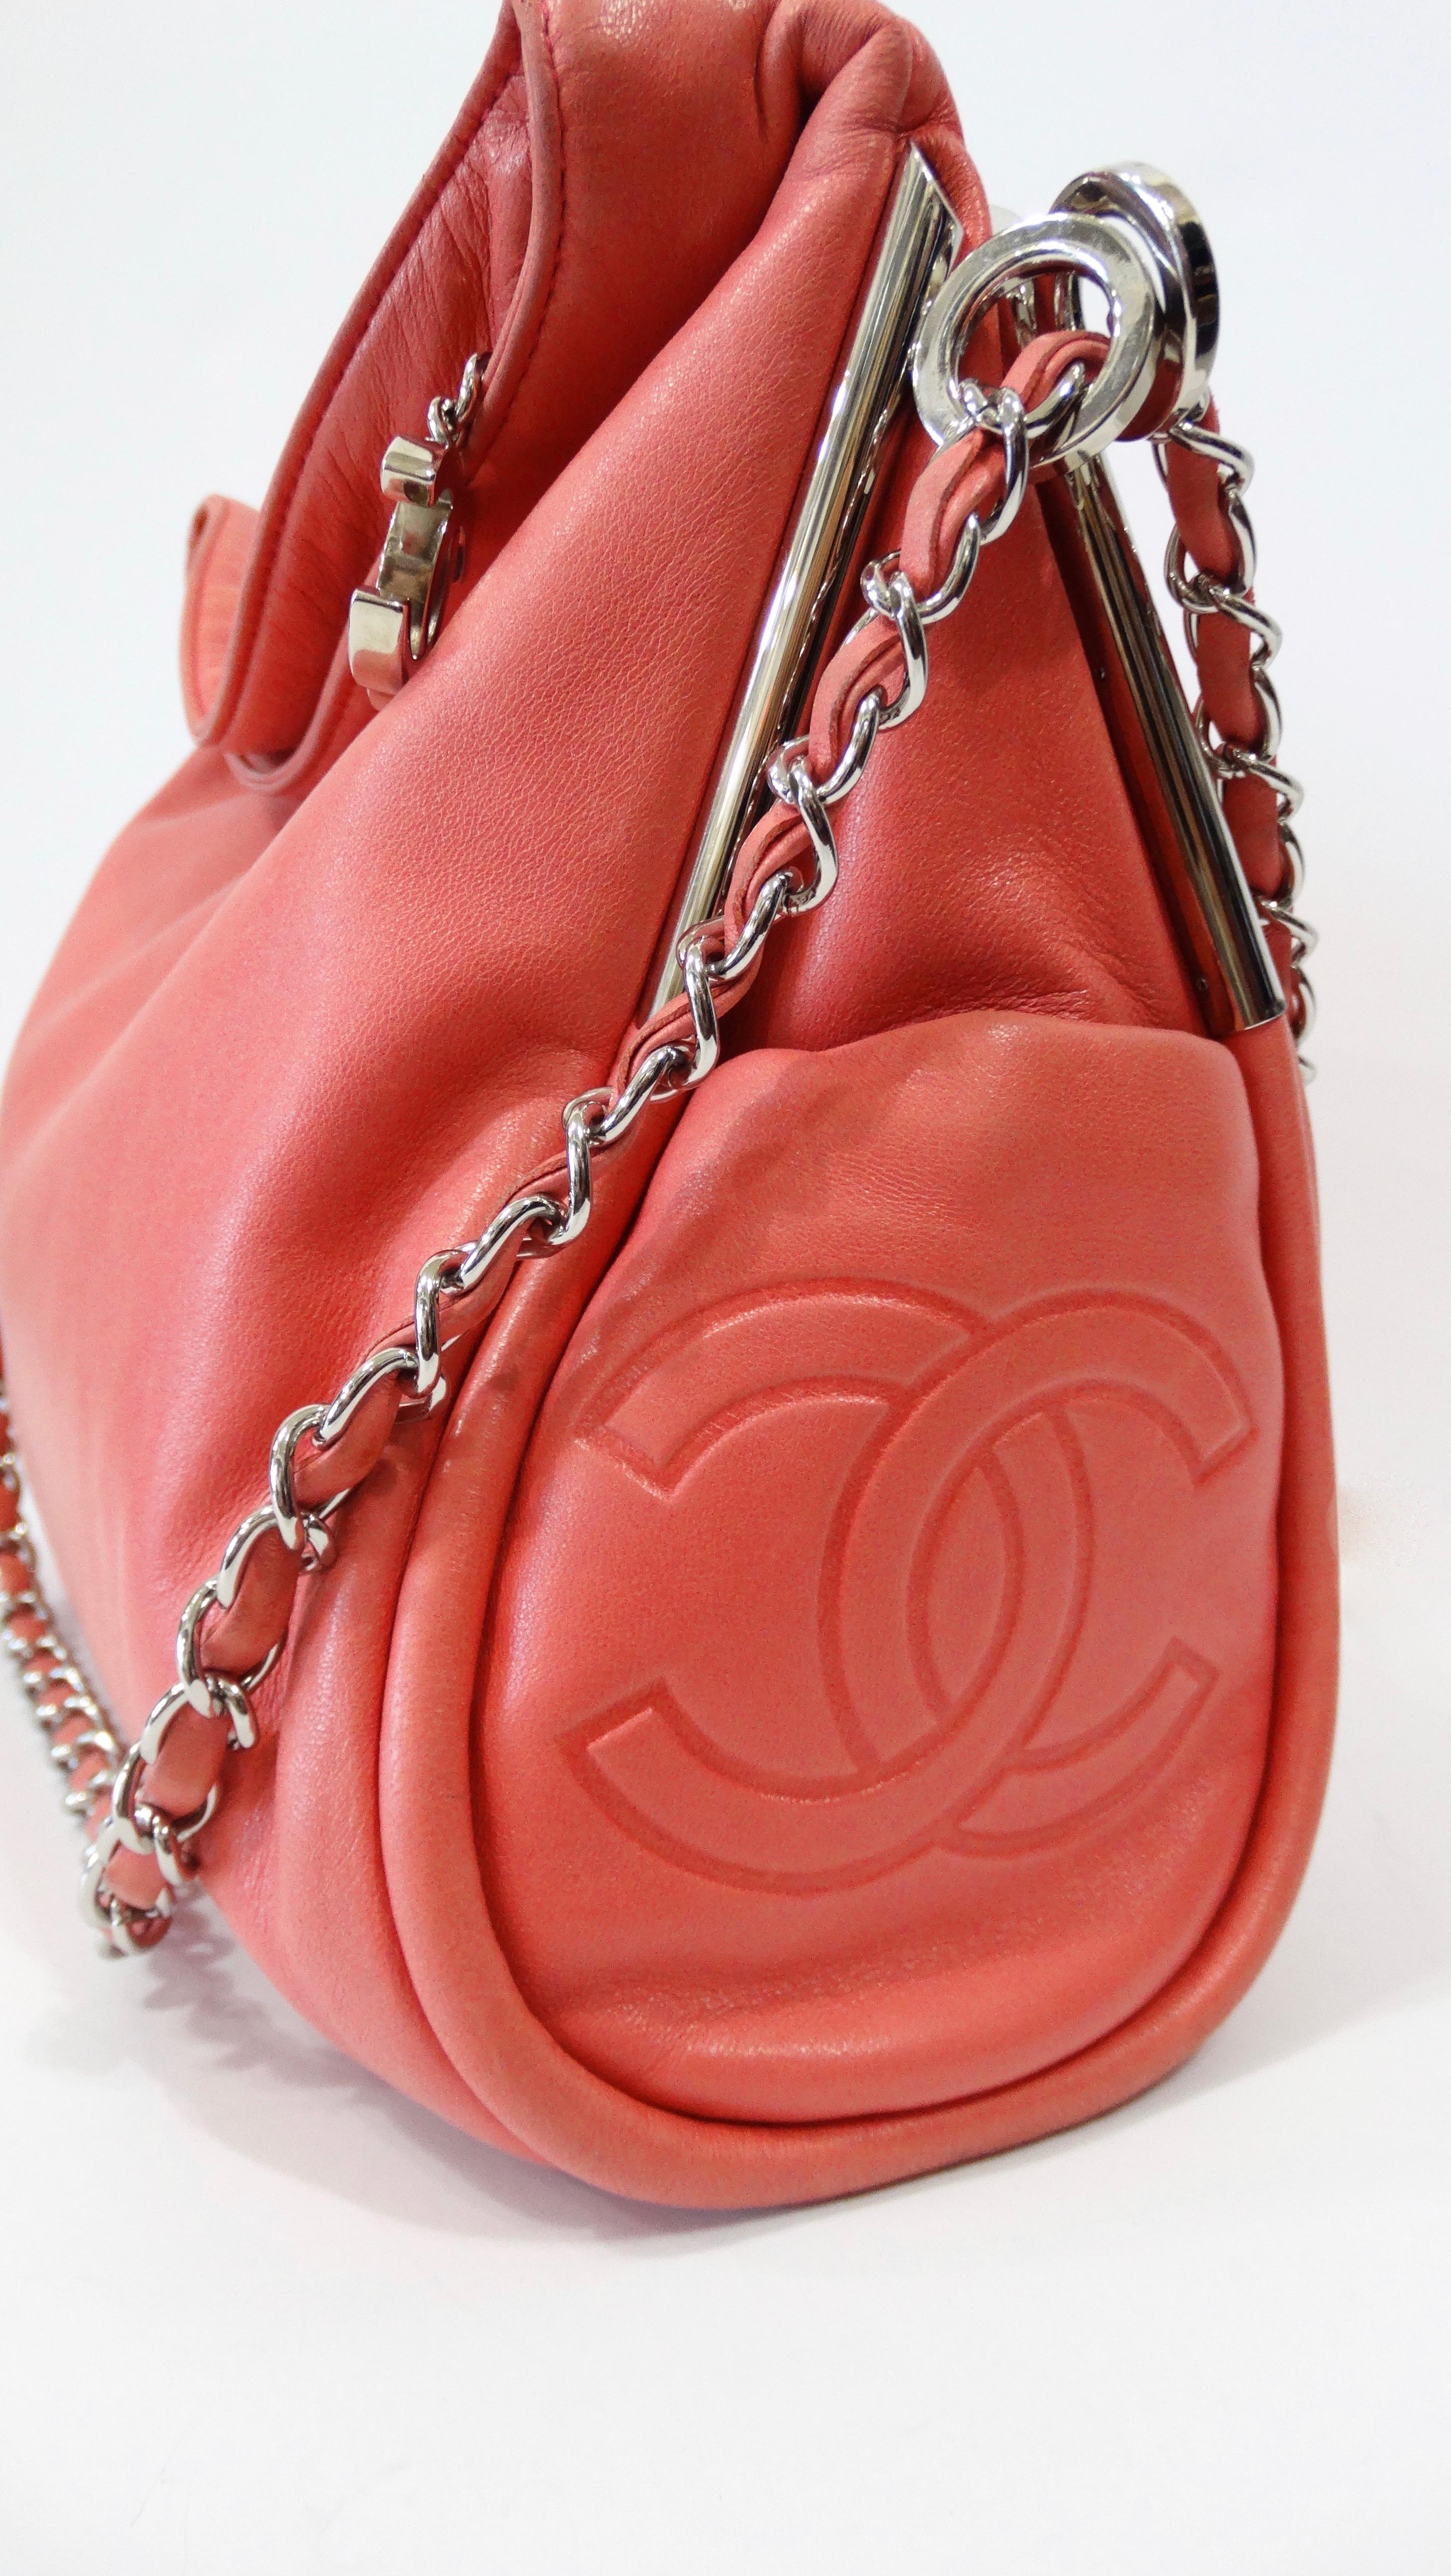 Never have a dull wardrobe moment with this adorable Chanel Ultimate Soft hobo bag! Circa 2004/2005, this hobo bag features soft pink lambskin leather, silver-tone hardware, single chain-link and leather shoulder strap and dual side exterior slit